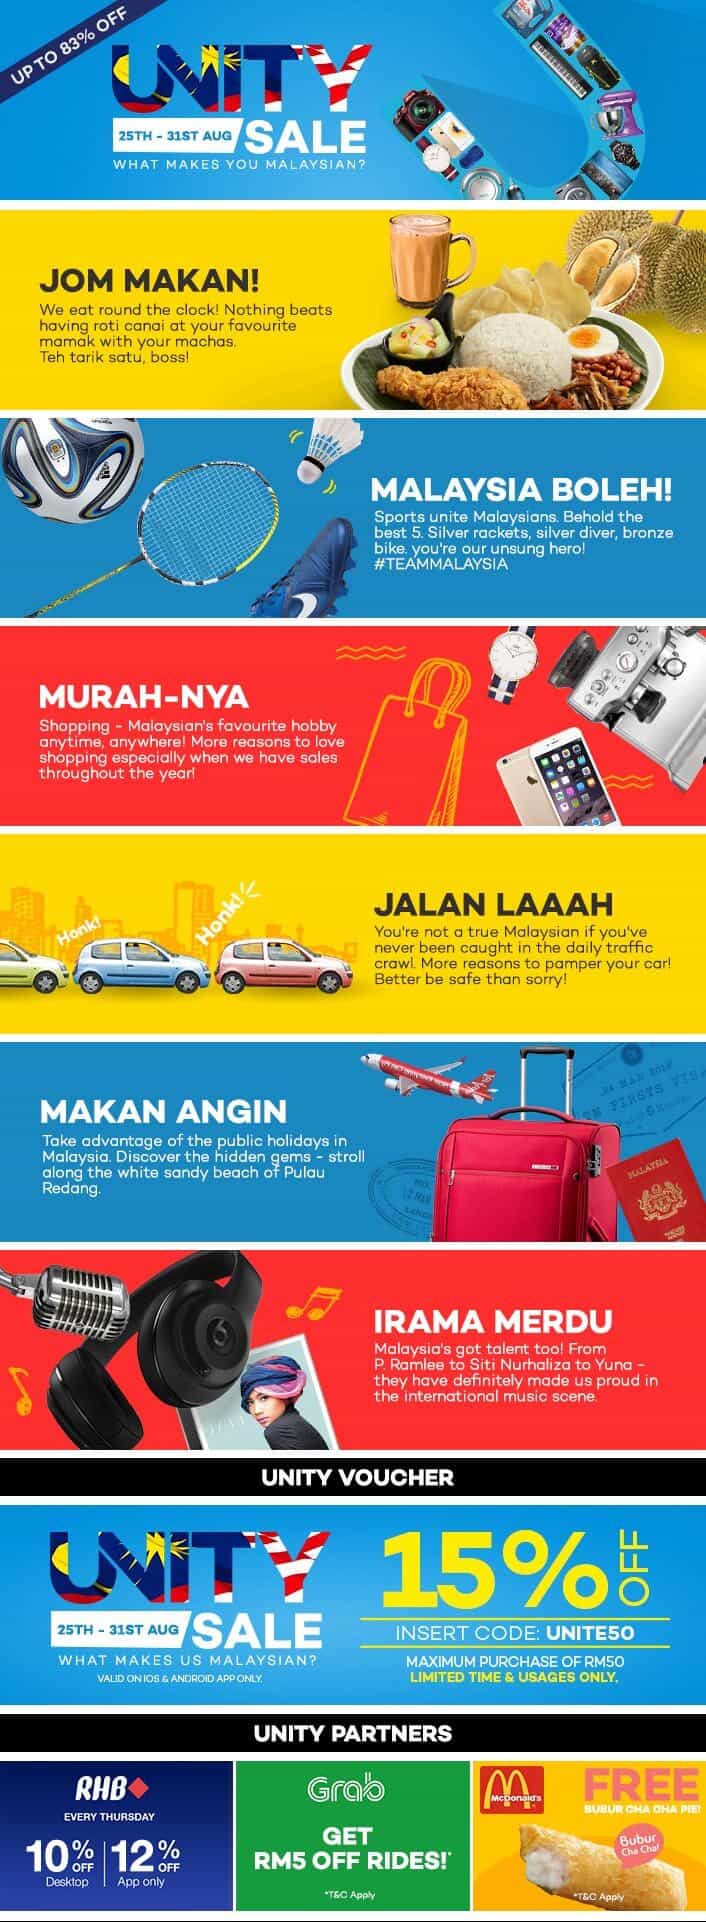 You are currently viewing Lazada Malaysia Merdeka Highlights that Celebrate Our Malaysian Traits